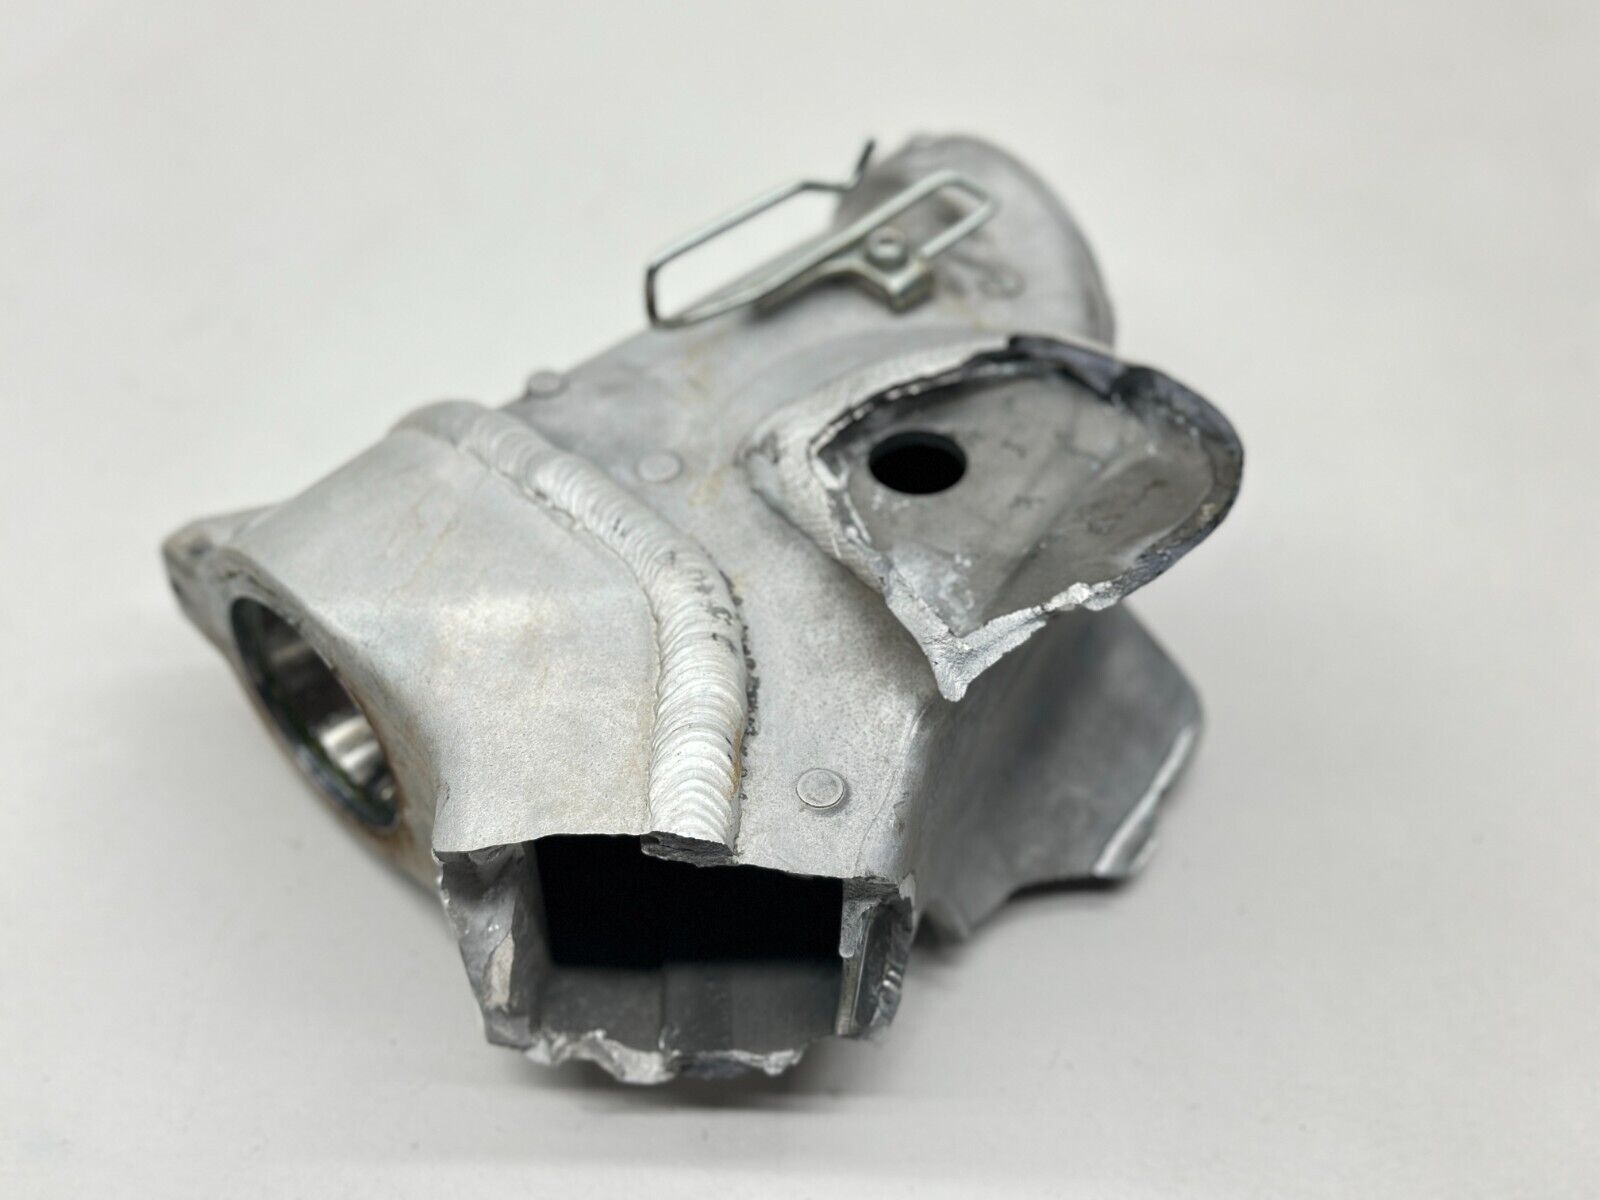 2022 Yamaha YZ450F Motorcycle Main Frame Chassis Aluminum Silver Stock YZ 450F